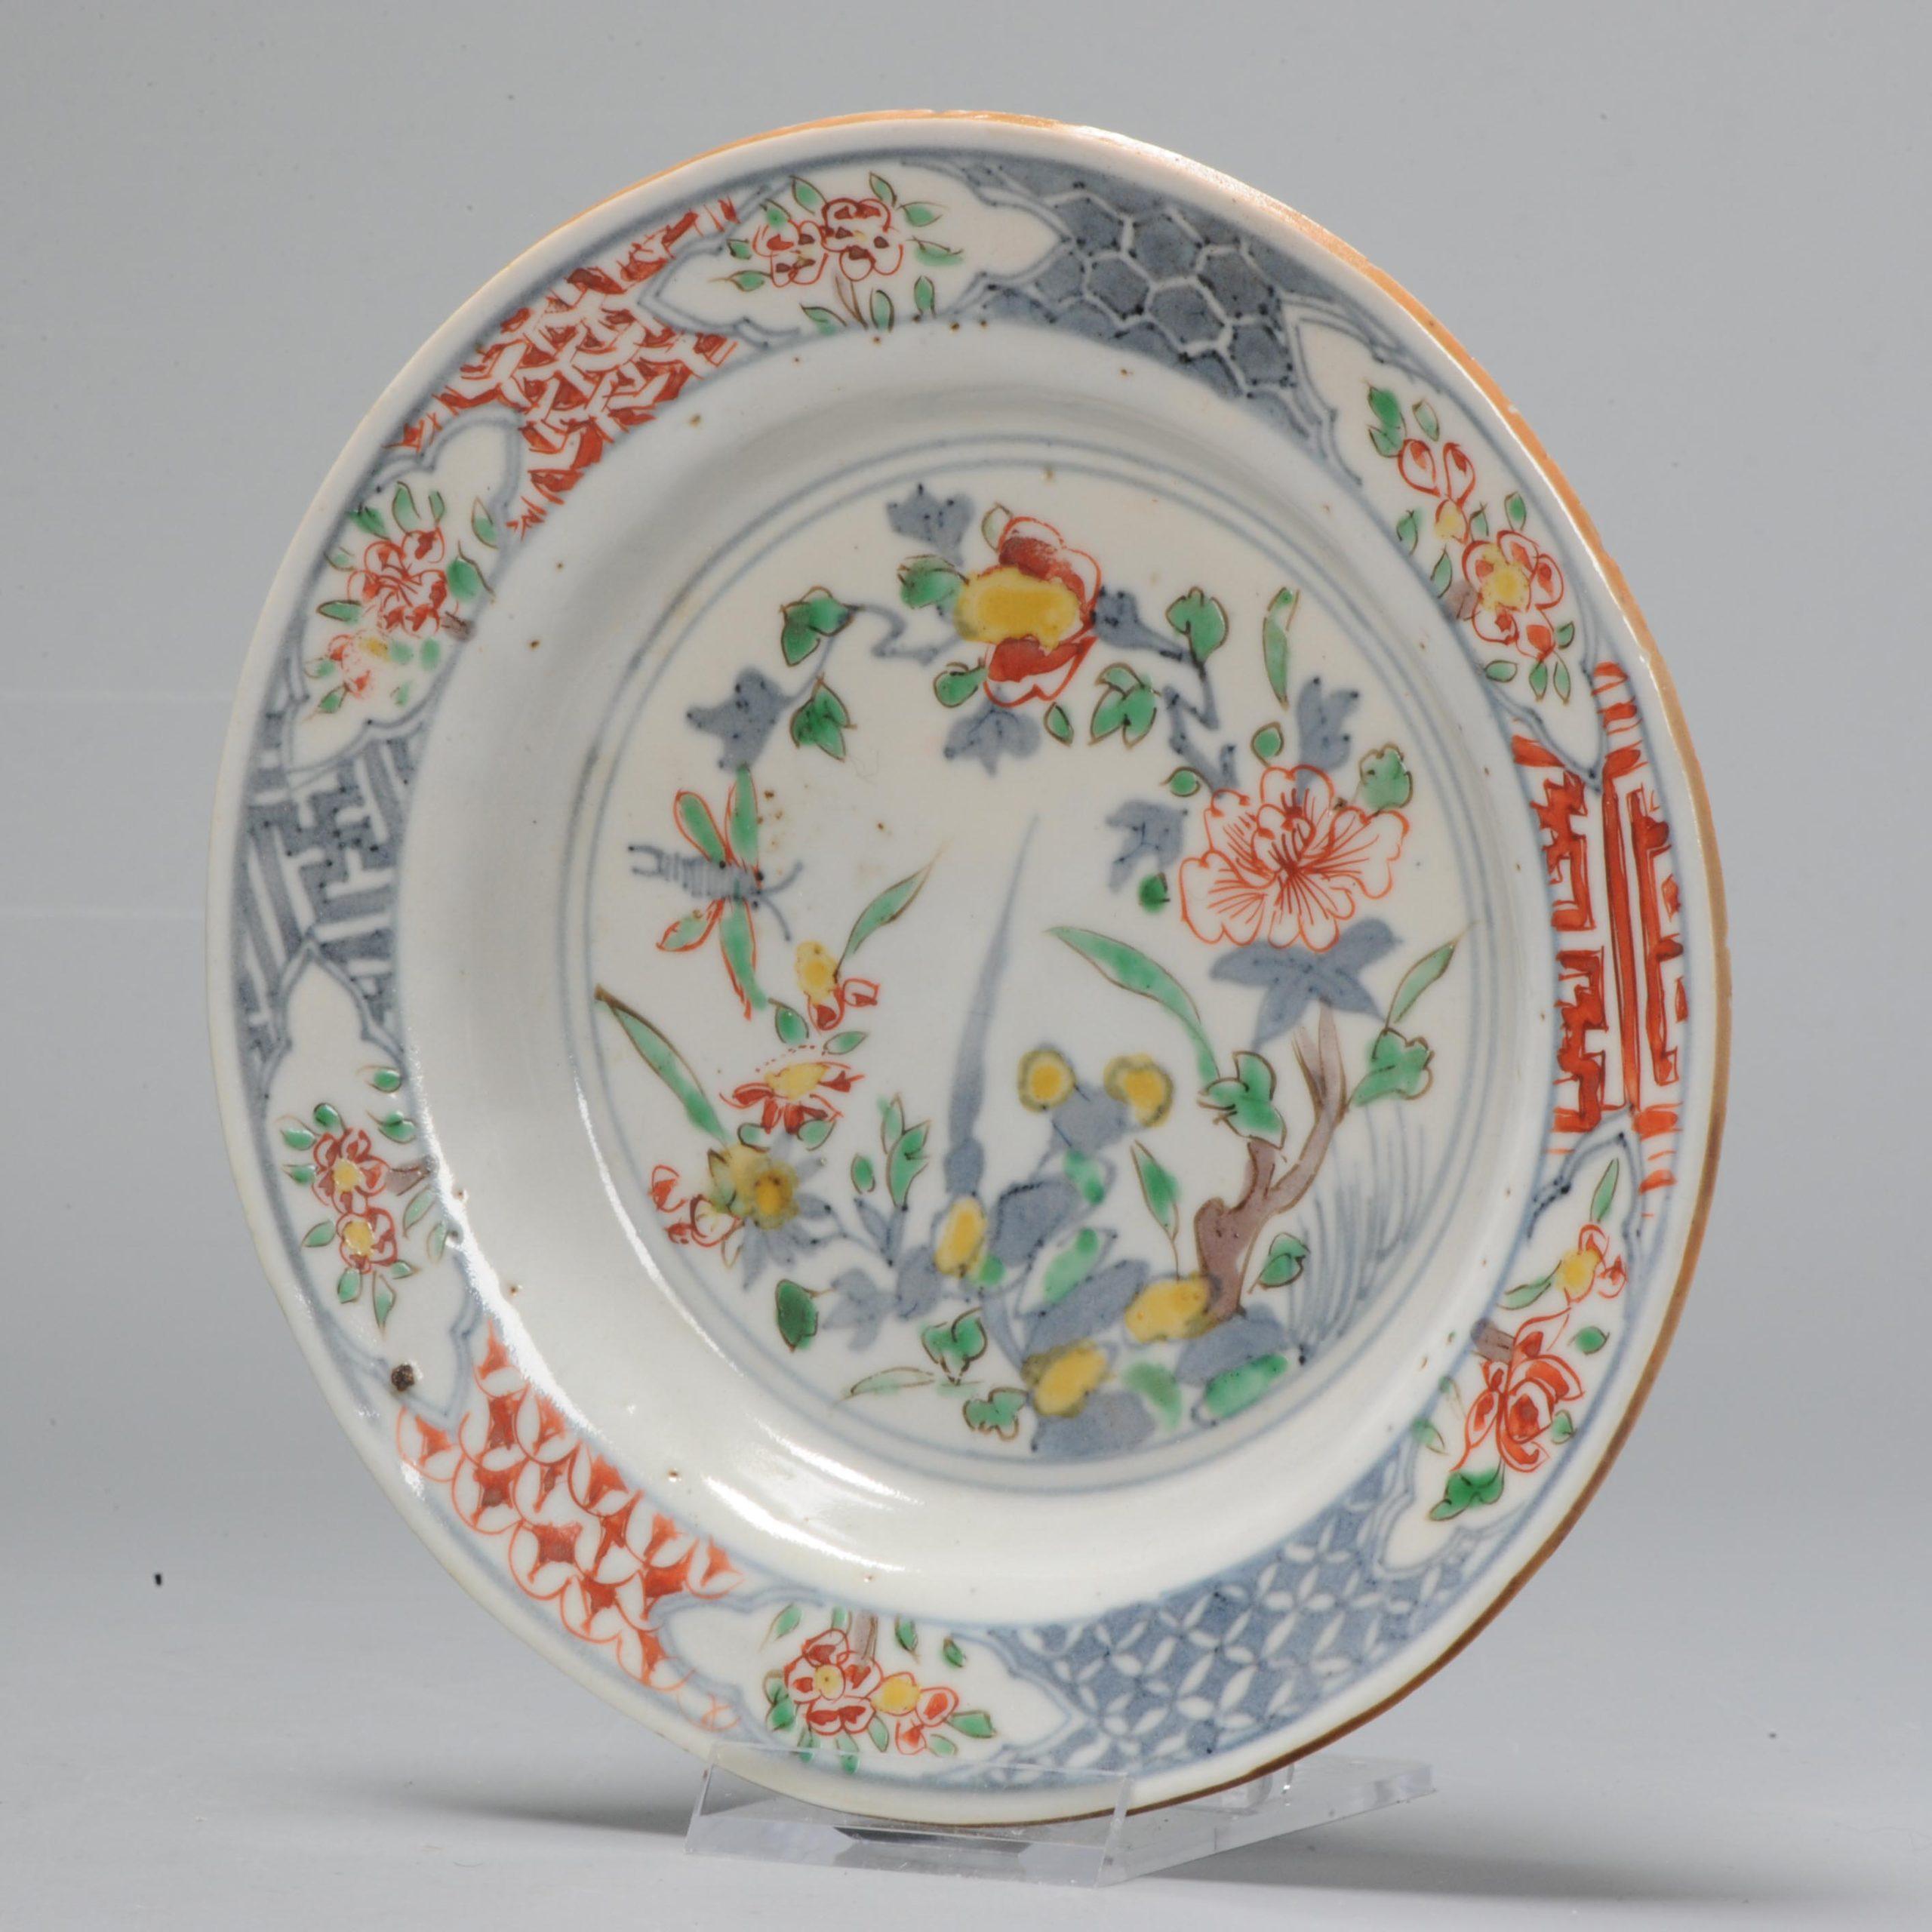 Dish with iron-red, green, aubergine, yellow, brown and black with an insect in flight above flowering peony issuing from rockwork, the rim with flower sprays reserved on diaper-pattern. Underglaze-blue fu (prosperity) mark, Chongzhen

Ming dynasty,